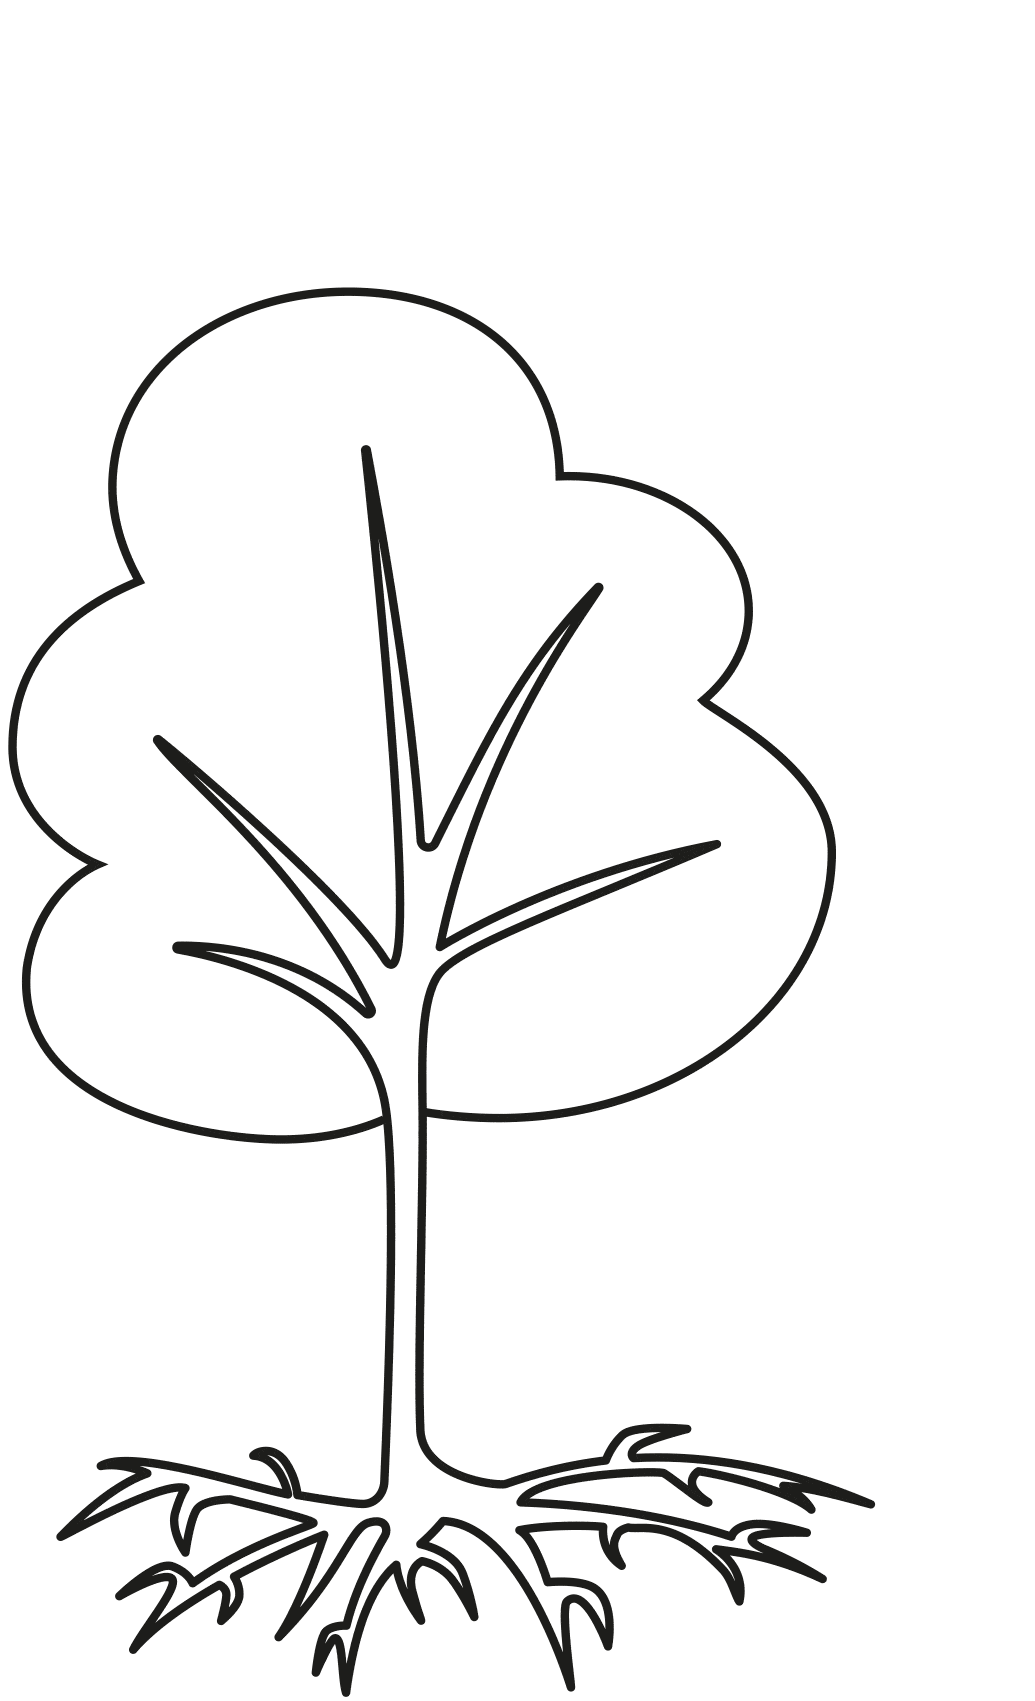 gif of a tree with good roots in a frame growth branding positioning